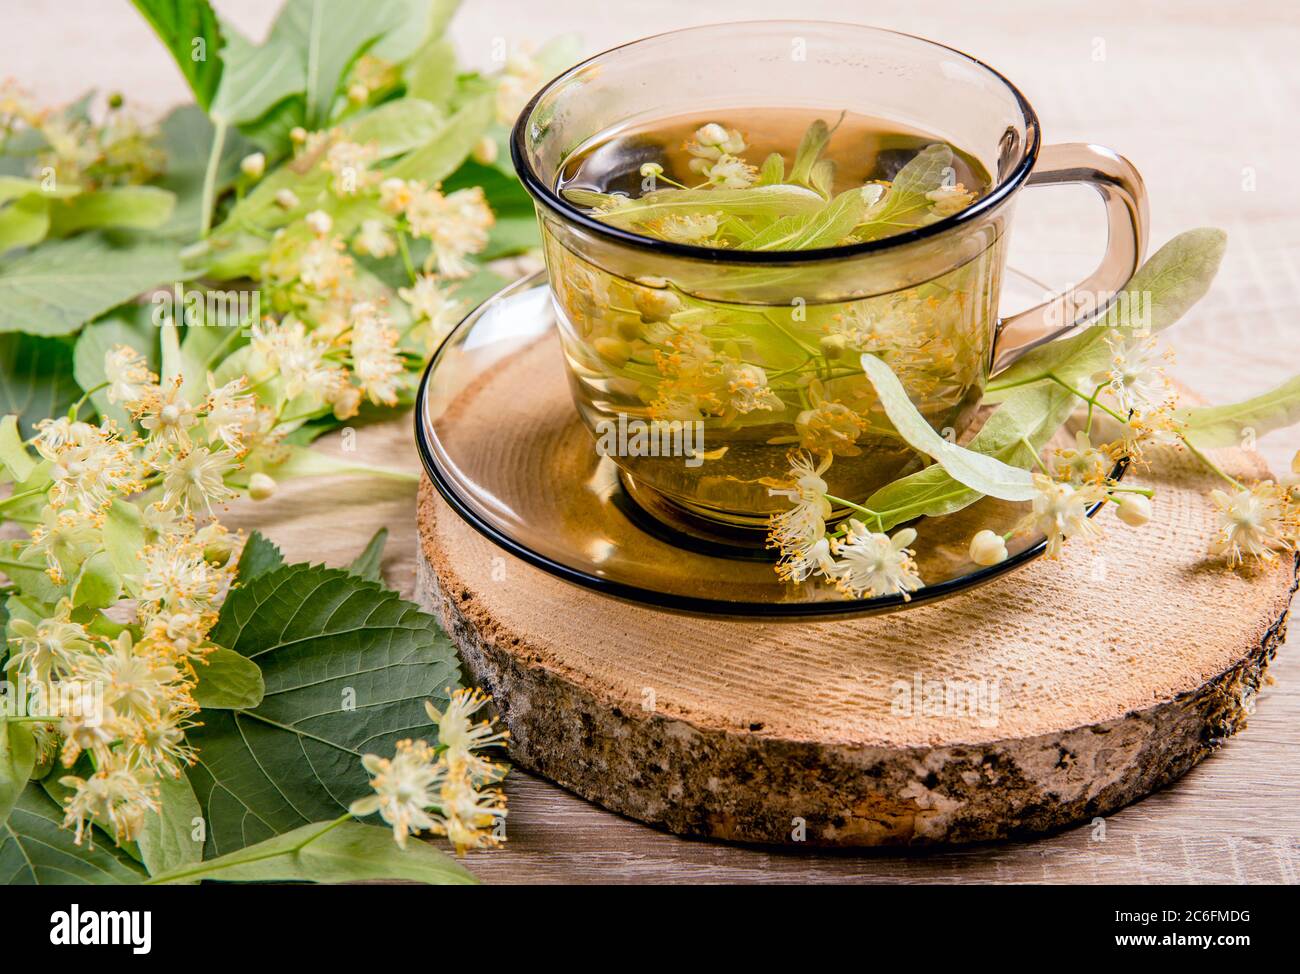 Tilia platyphyllos known as large-leaved linden herbal tea made out of an freshly picked blossoms with tree leaves and branches with blossoms for deco Stock Photo